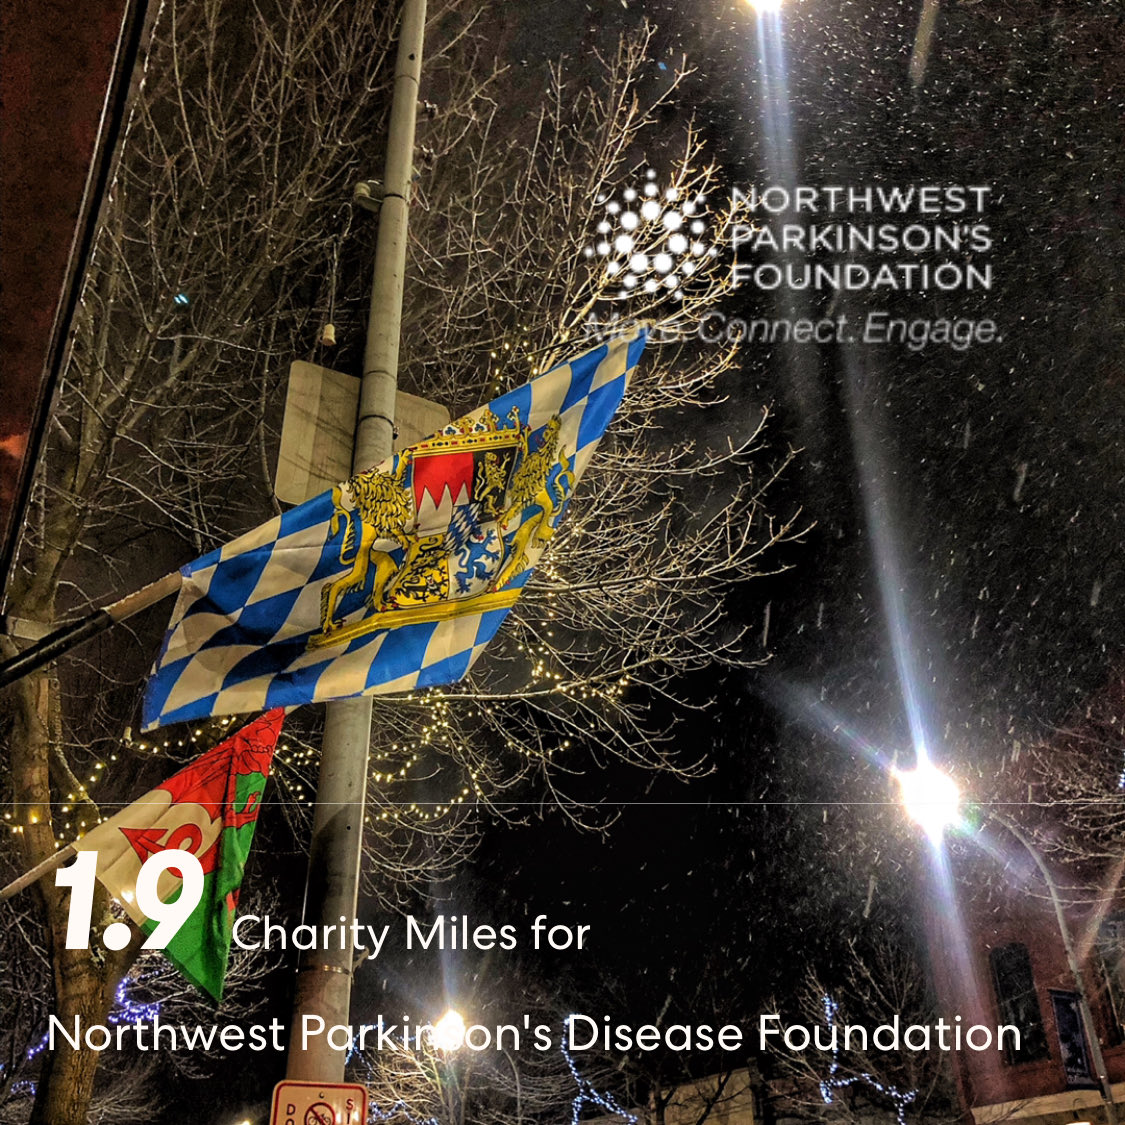 In #MoscowID today, 1.9 ⁦@CharityMiles⁩ for ⁦@NWParkinsons⁩ . I’d be grateful for your support. If you’re in a position to do so, please click here to sponsor me.

miles.app.link/e/BrnzMCYSMwb